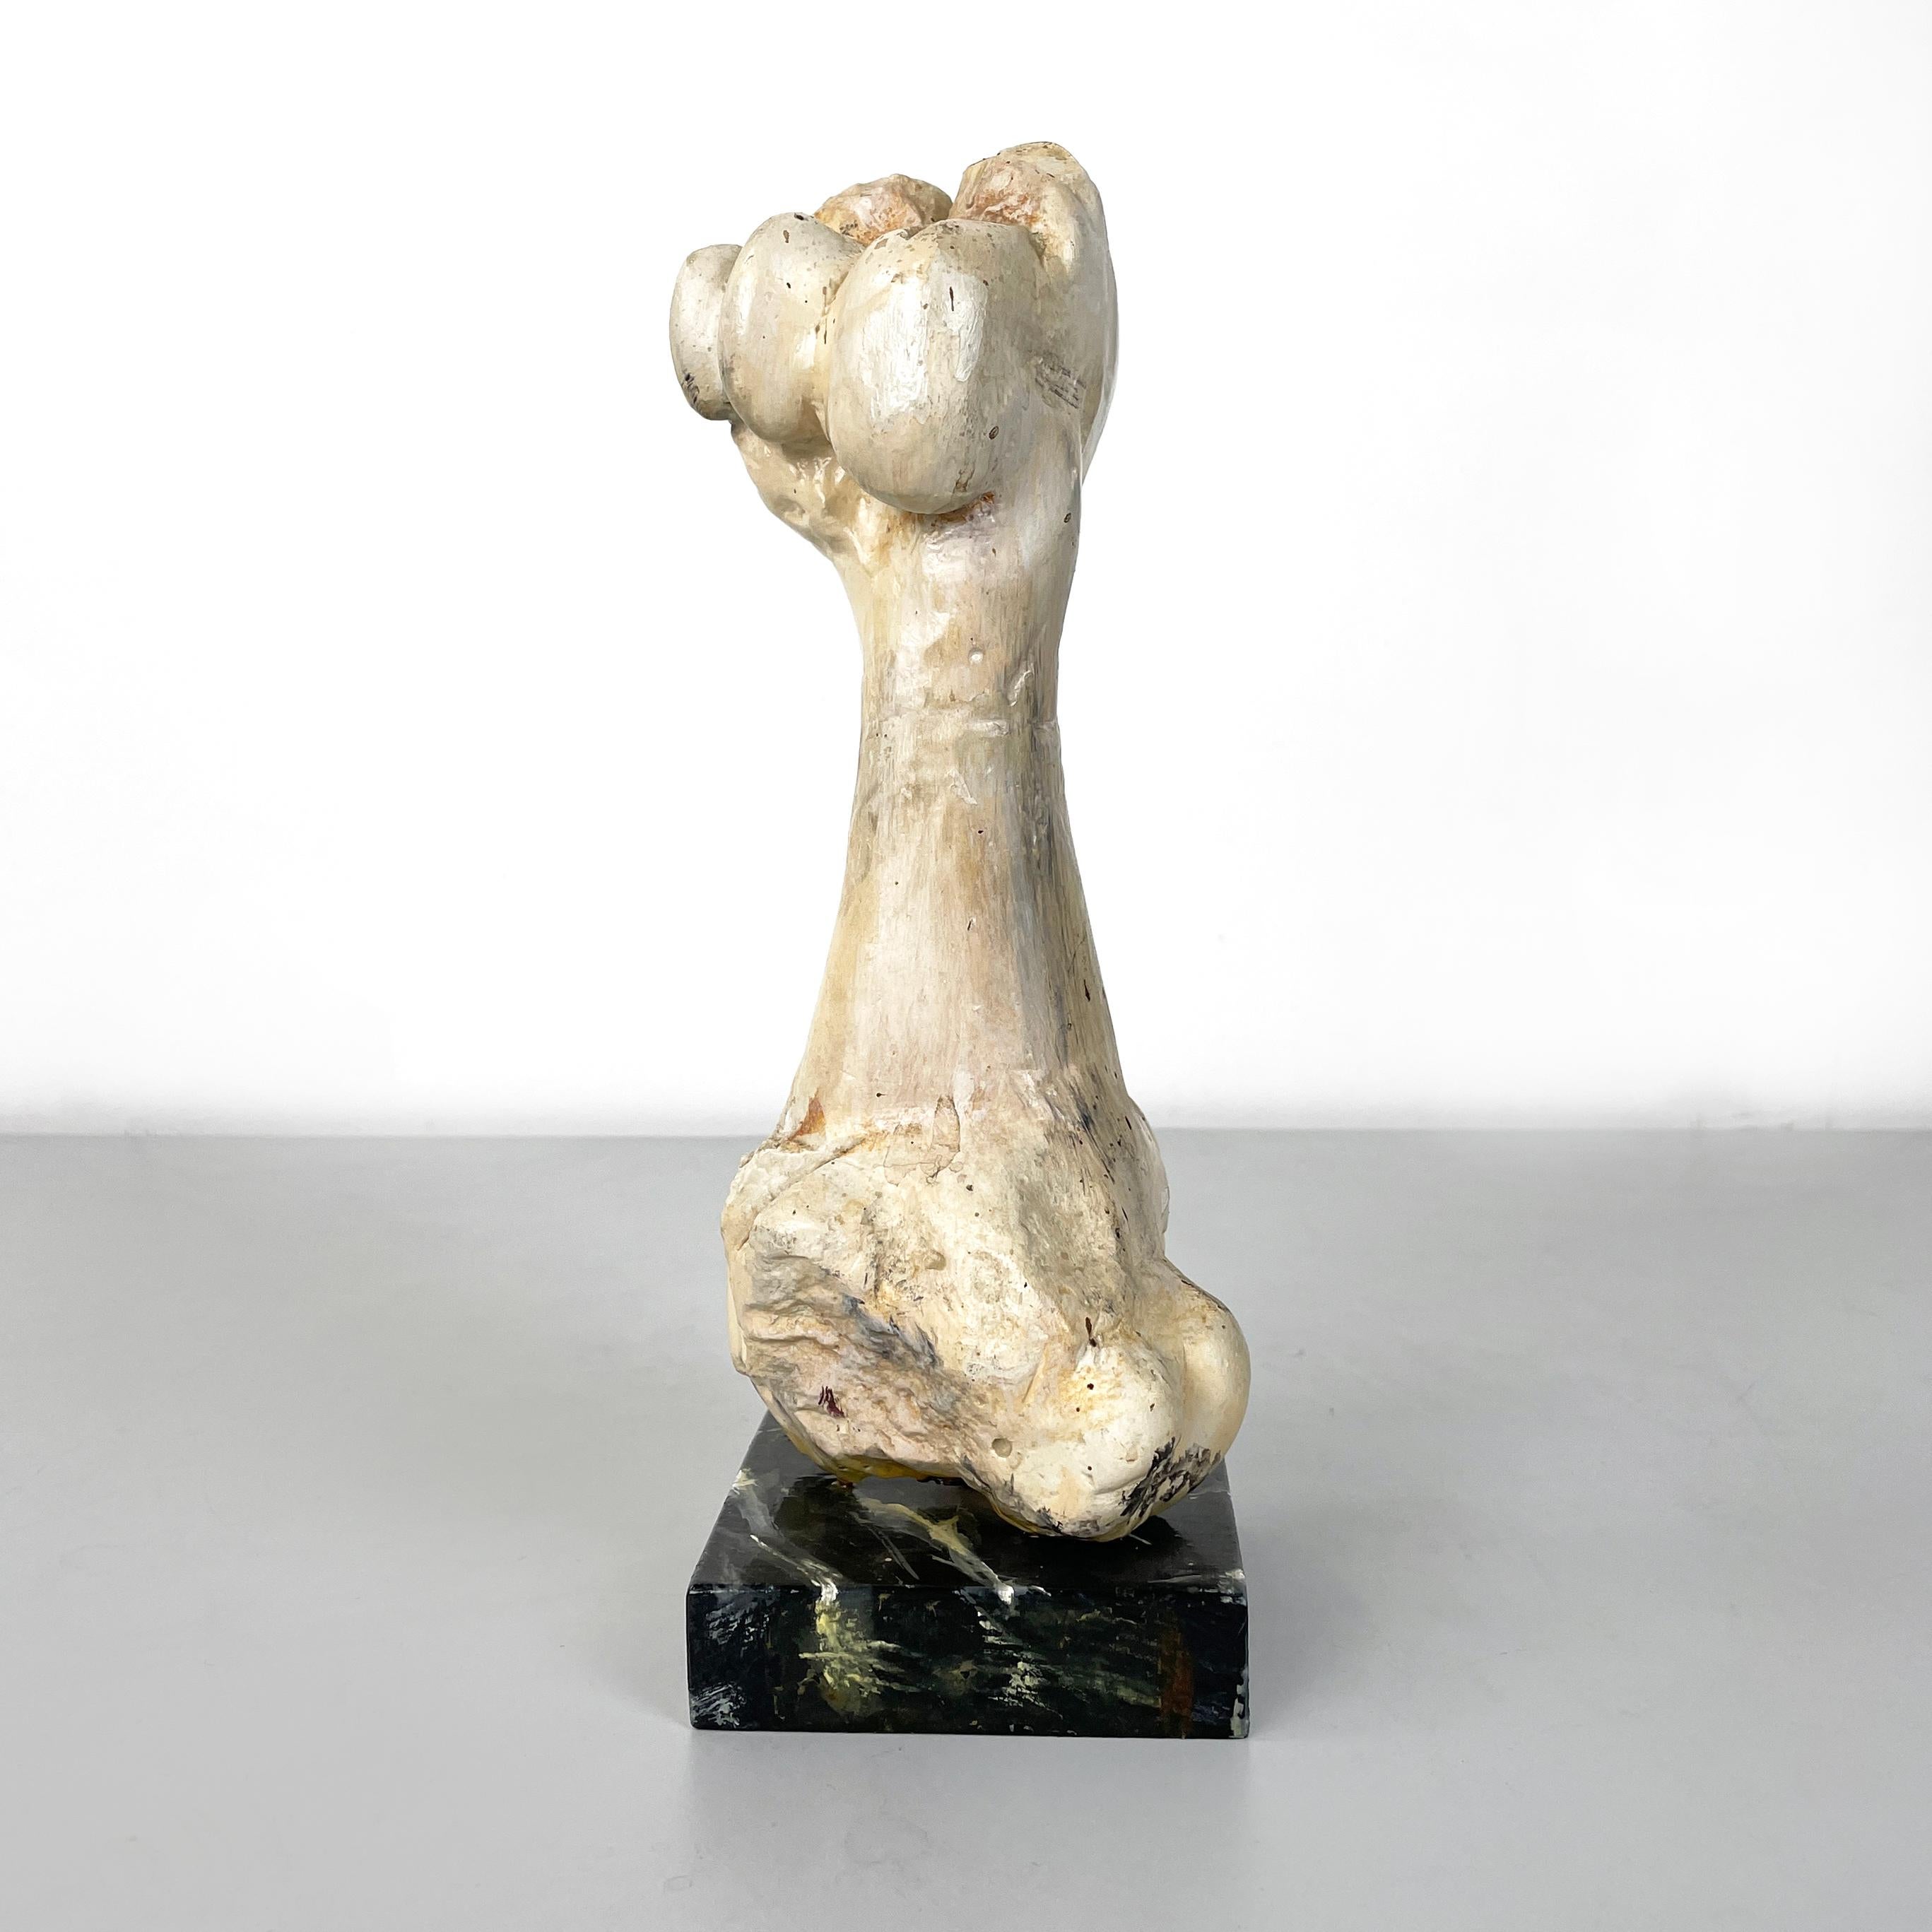 Italian modern Wooden sculpture of a bone by N.F. Puccio, 1990s
Sculpture entirely in painted wood. This object represents a short and thick bone, probably from an animal. The square base is made of wood painted in black and white to create a marble